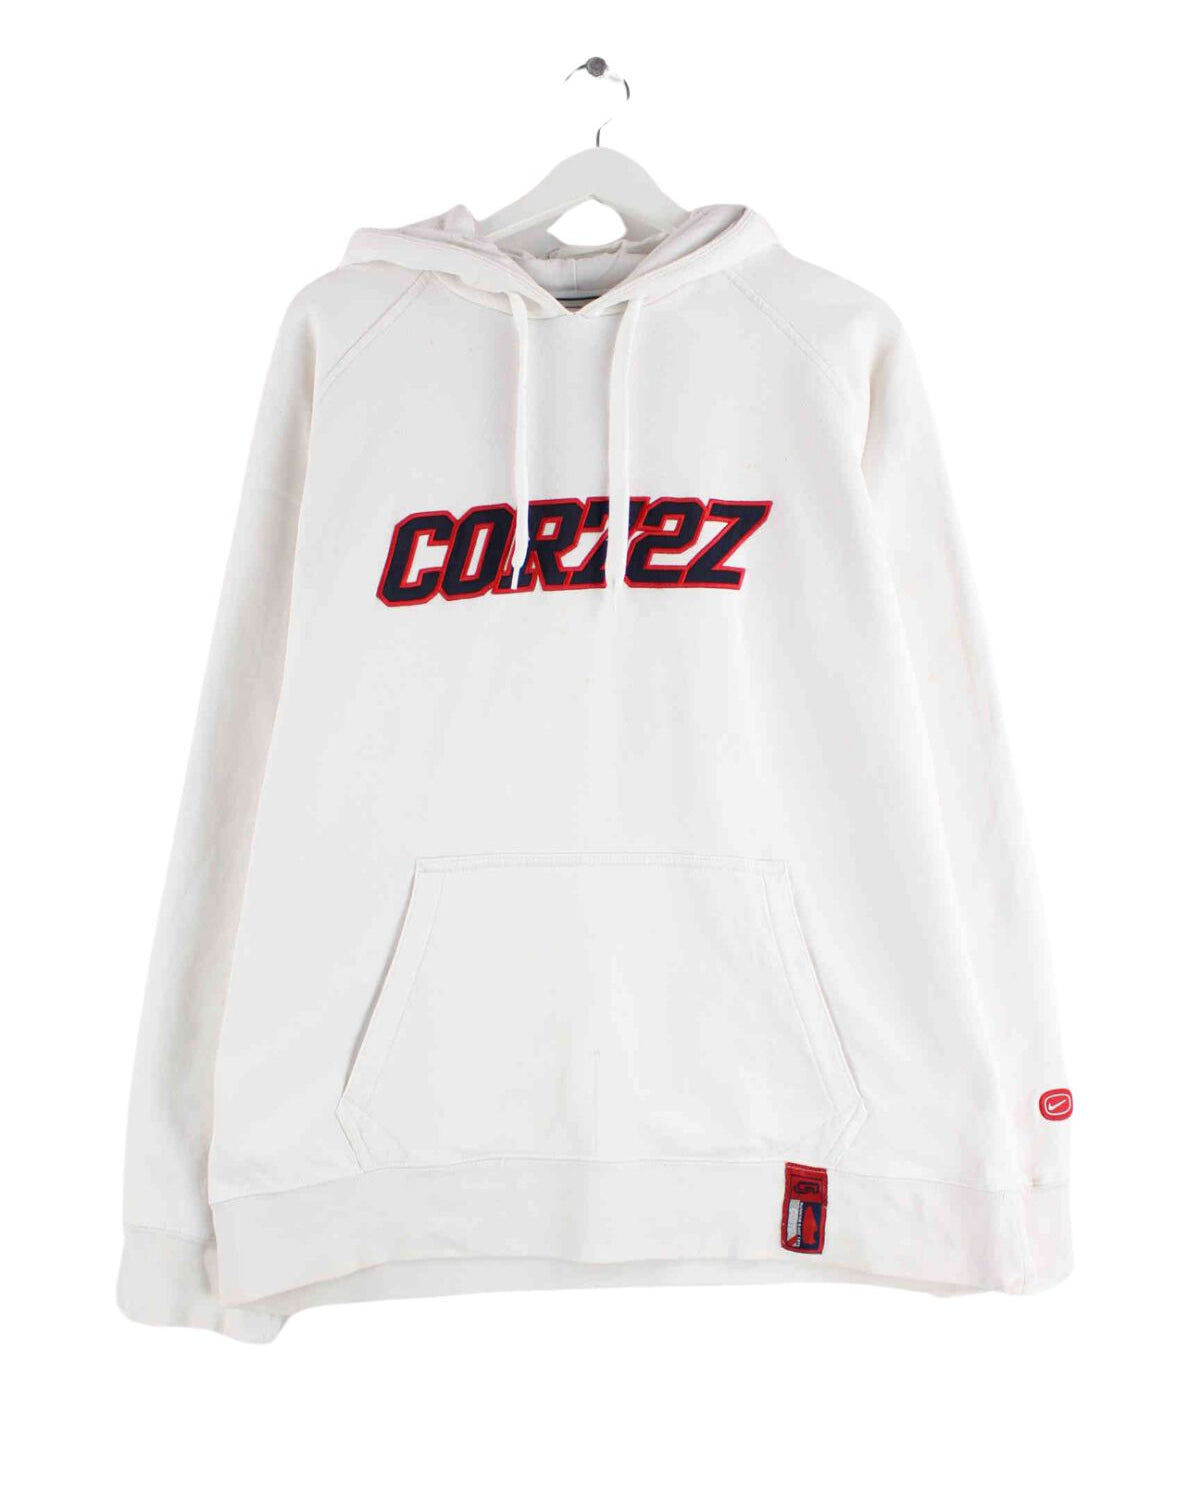 Nike y2k Cor72z Embroidered Hoodie Weiß L (front image)